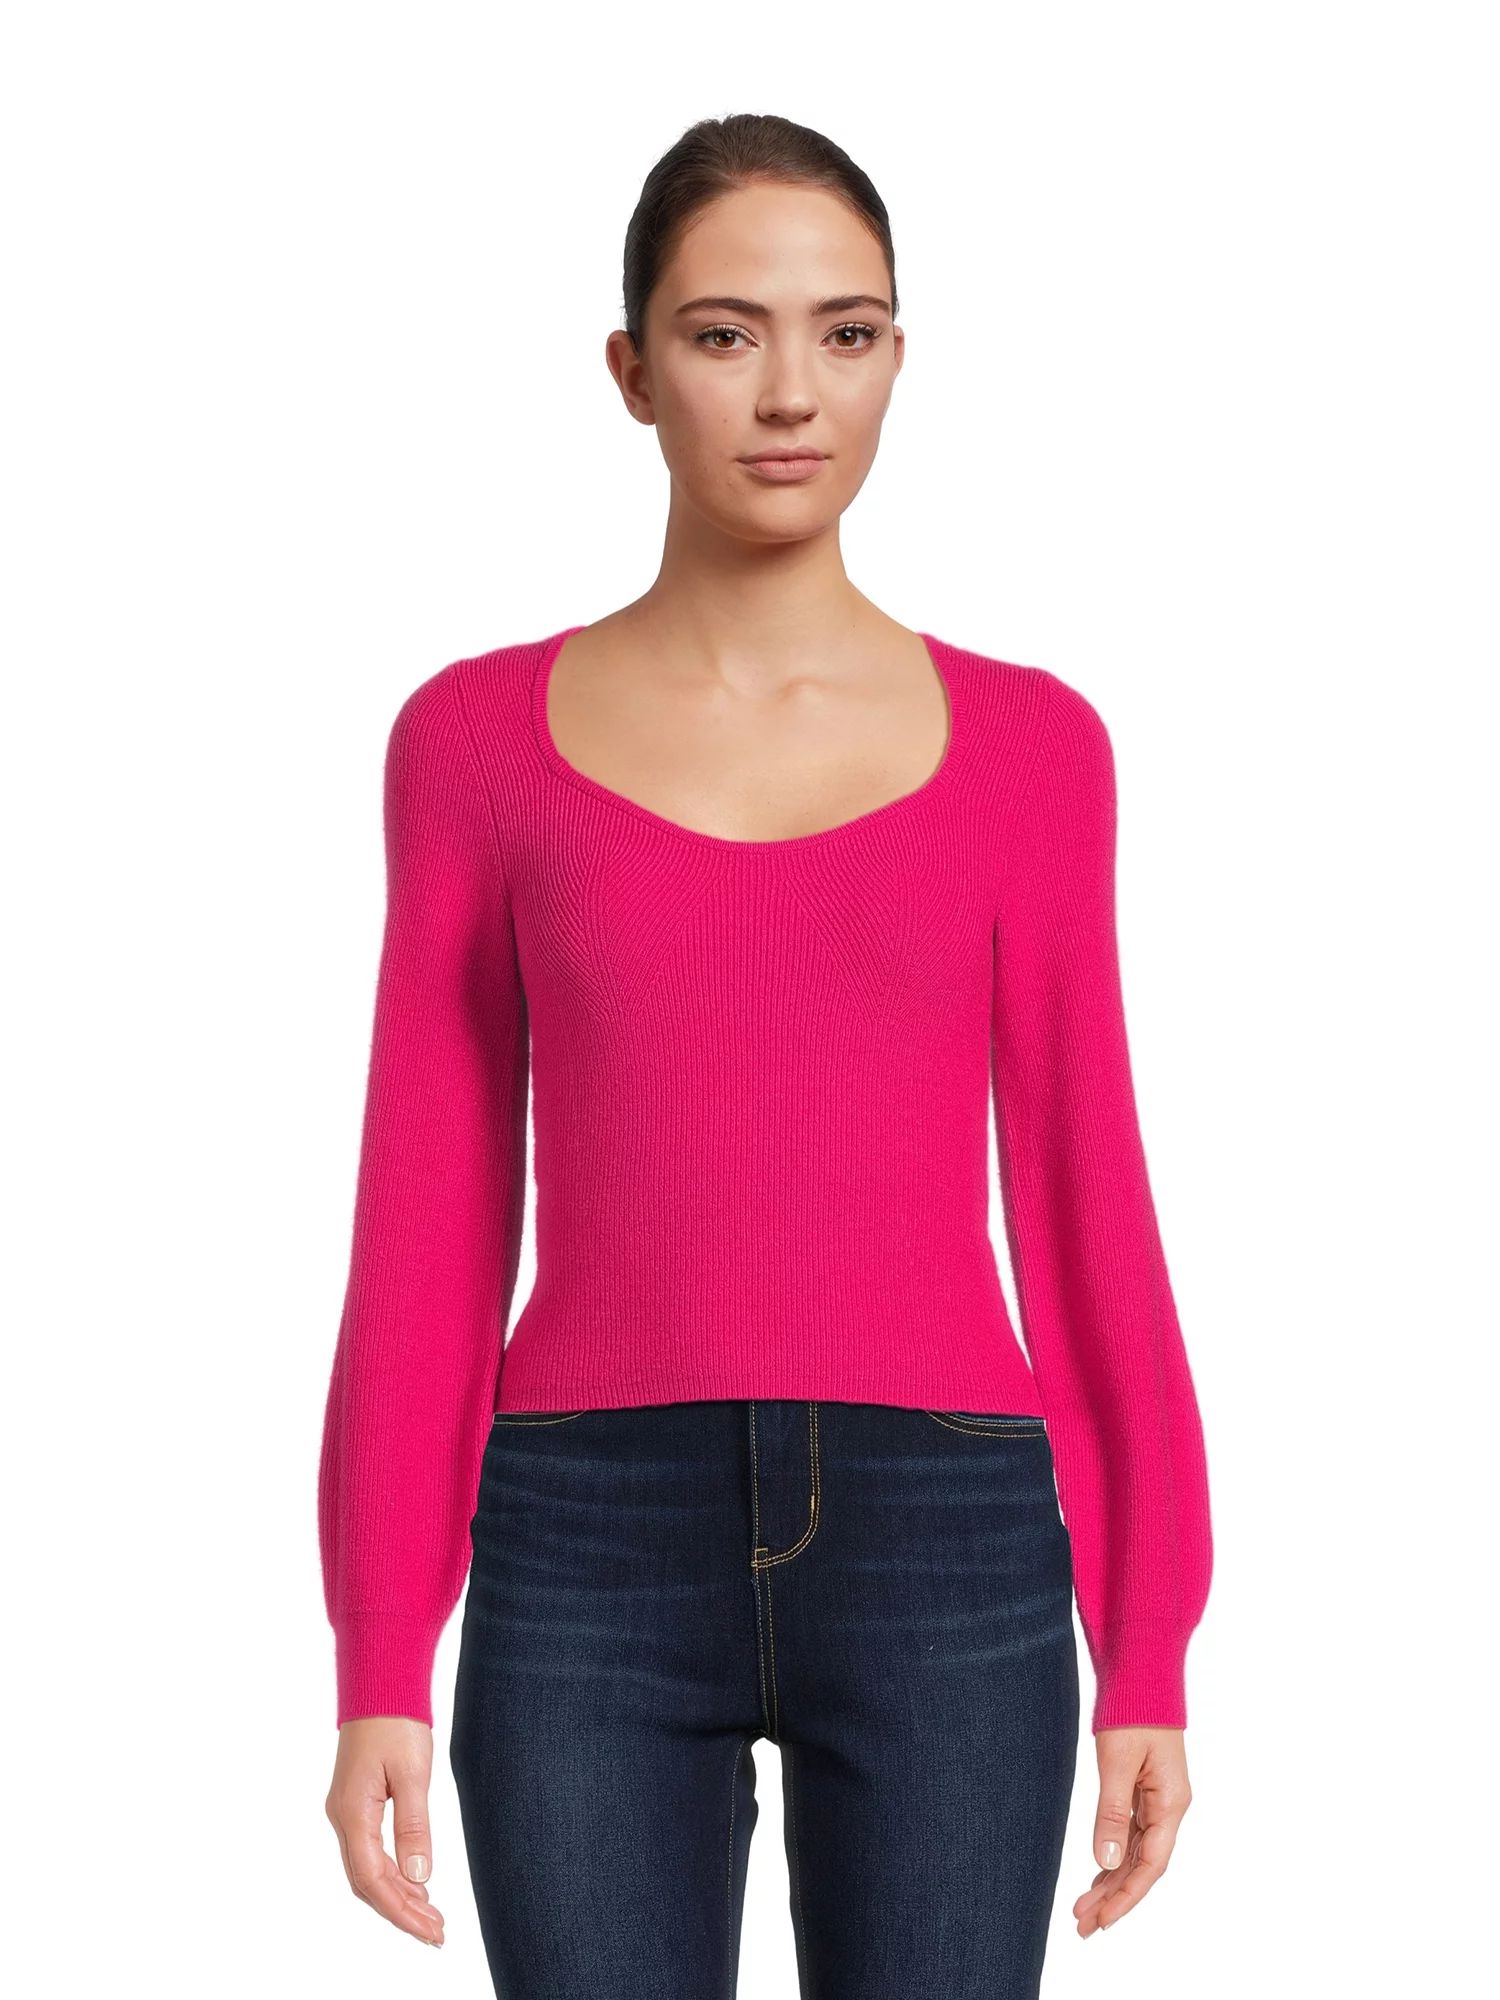 Pink Rose Juniors Square Neck Pullover Sweater with Long Sleeves, Sizes S-L | Walmart (US)